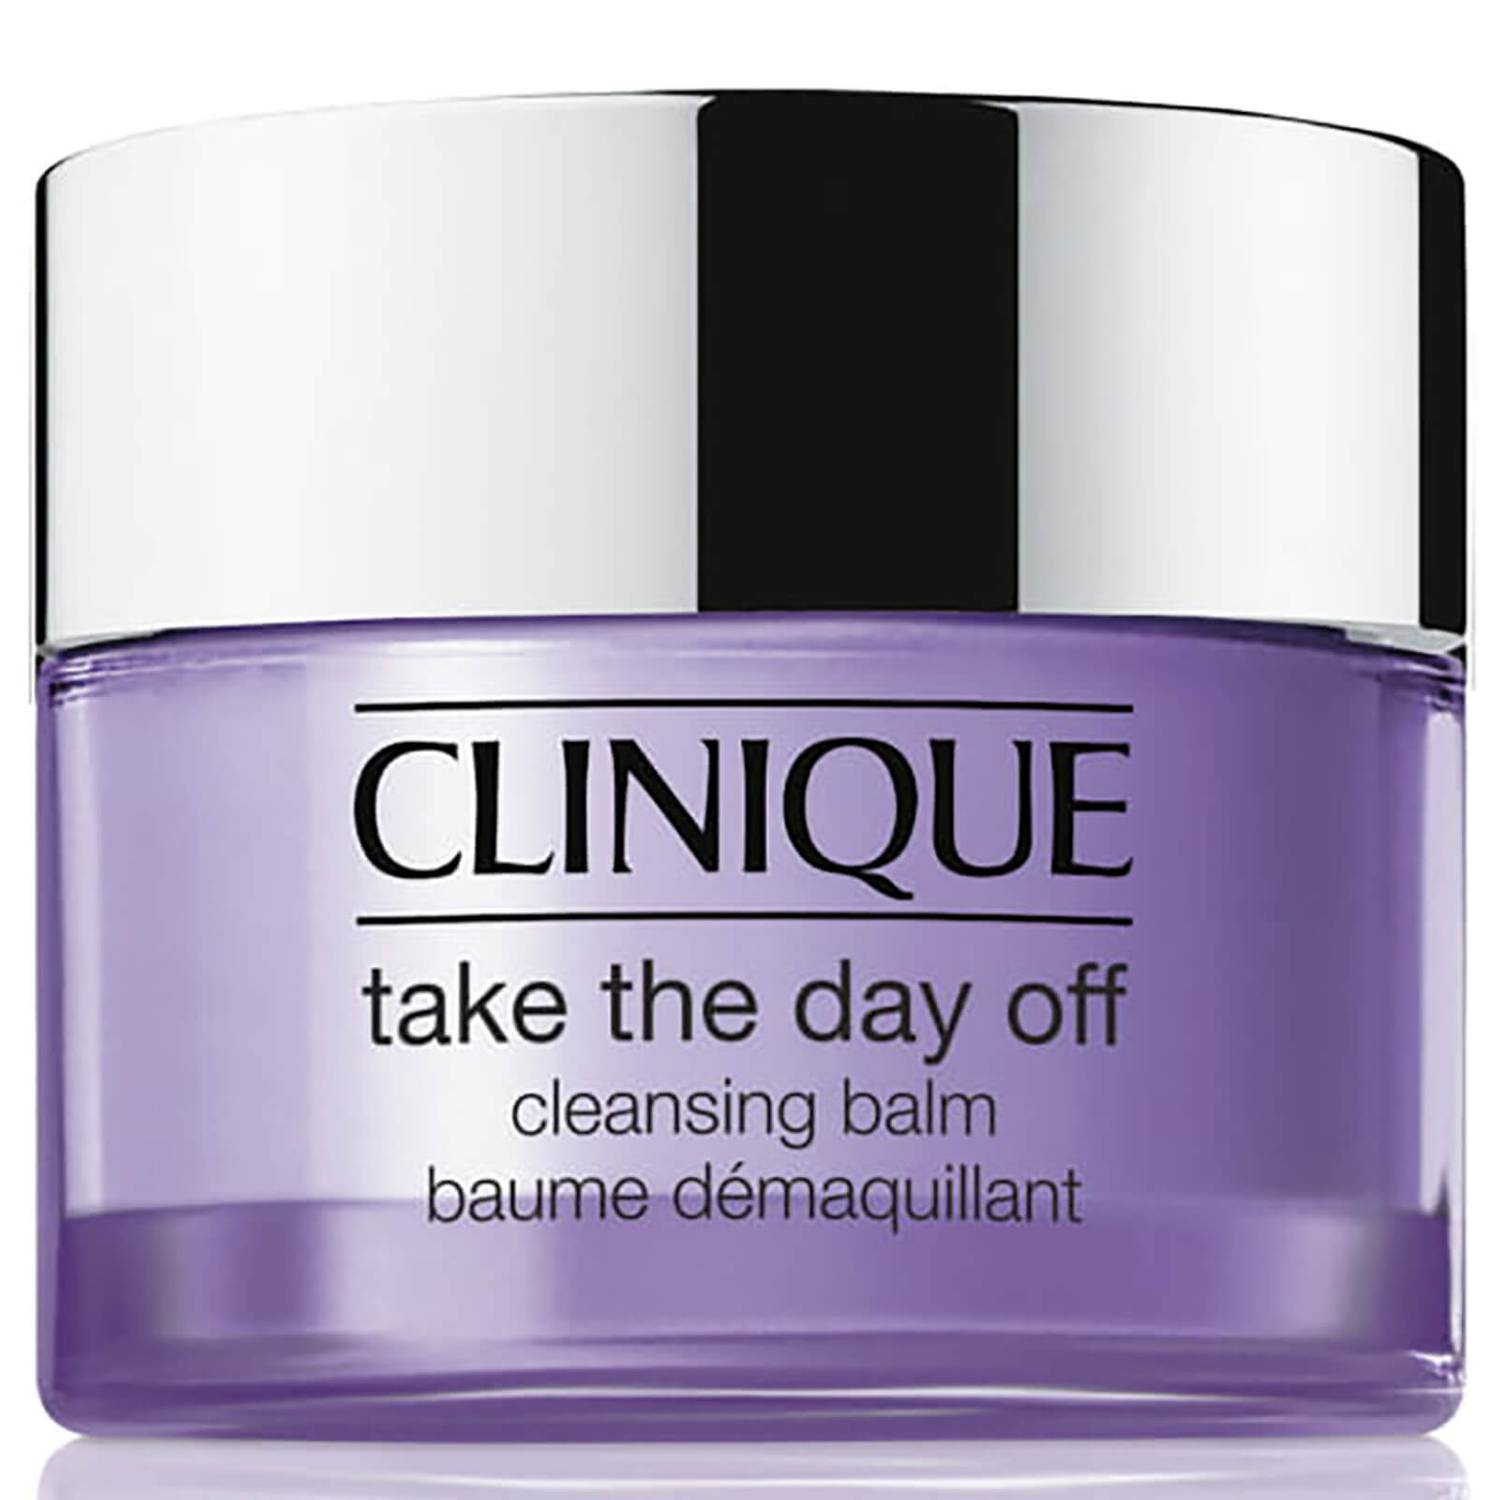 Clinique Take The Day Off Cleansing Balm 30ml - Feel Gorgeous